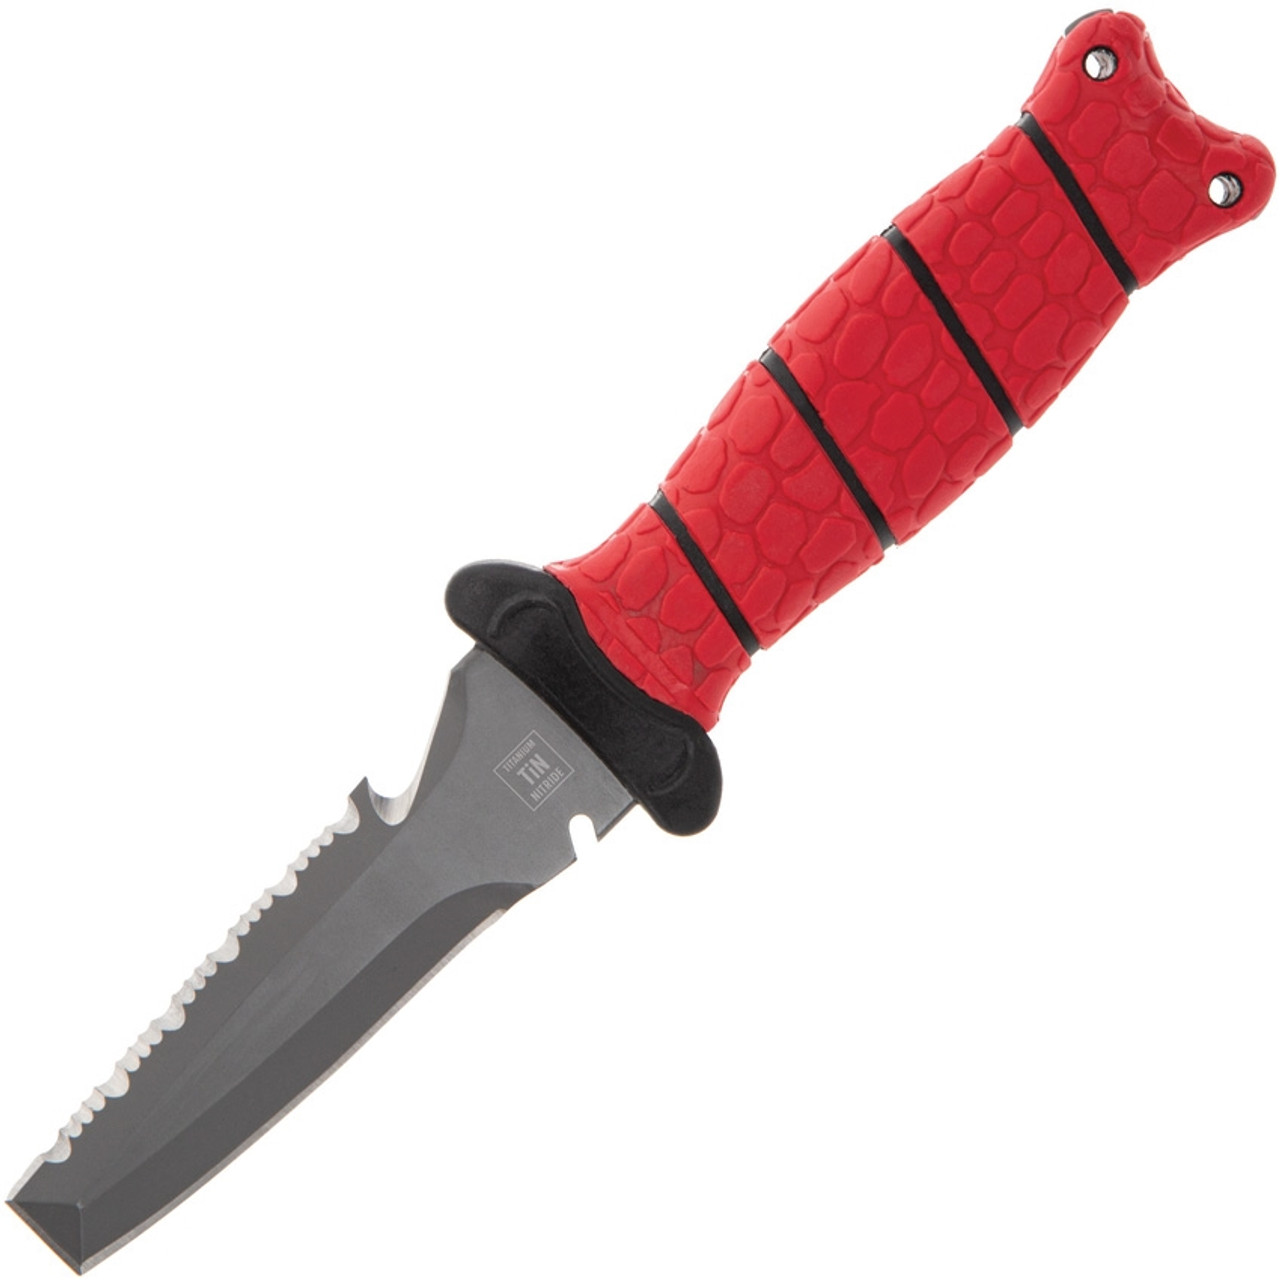 Bubba Blade Blunt Scout Dive Knife, 1107809, 4" Gray Double Edge Combo Blade, Red TPR Handle, Polymer Sheath